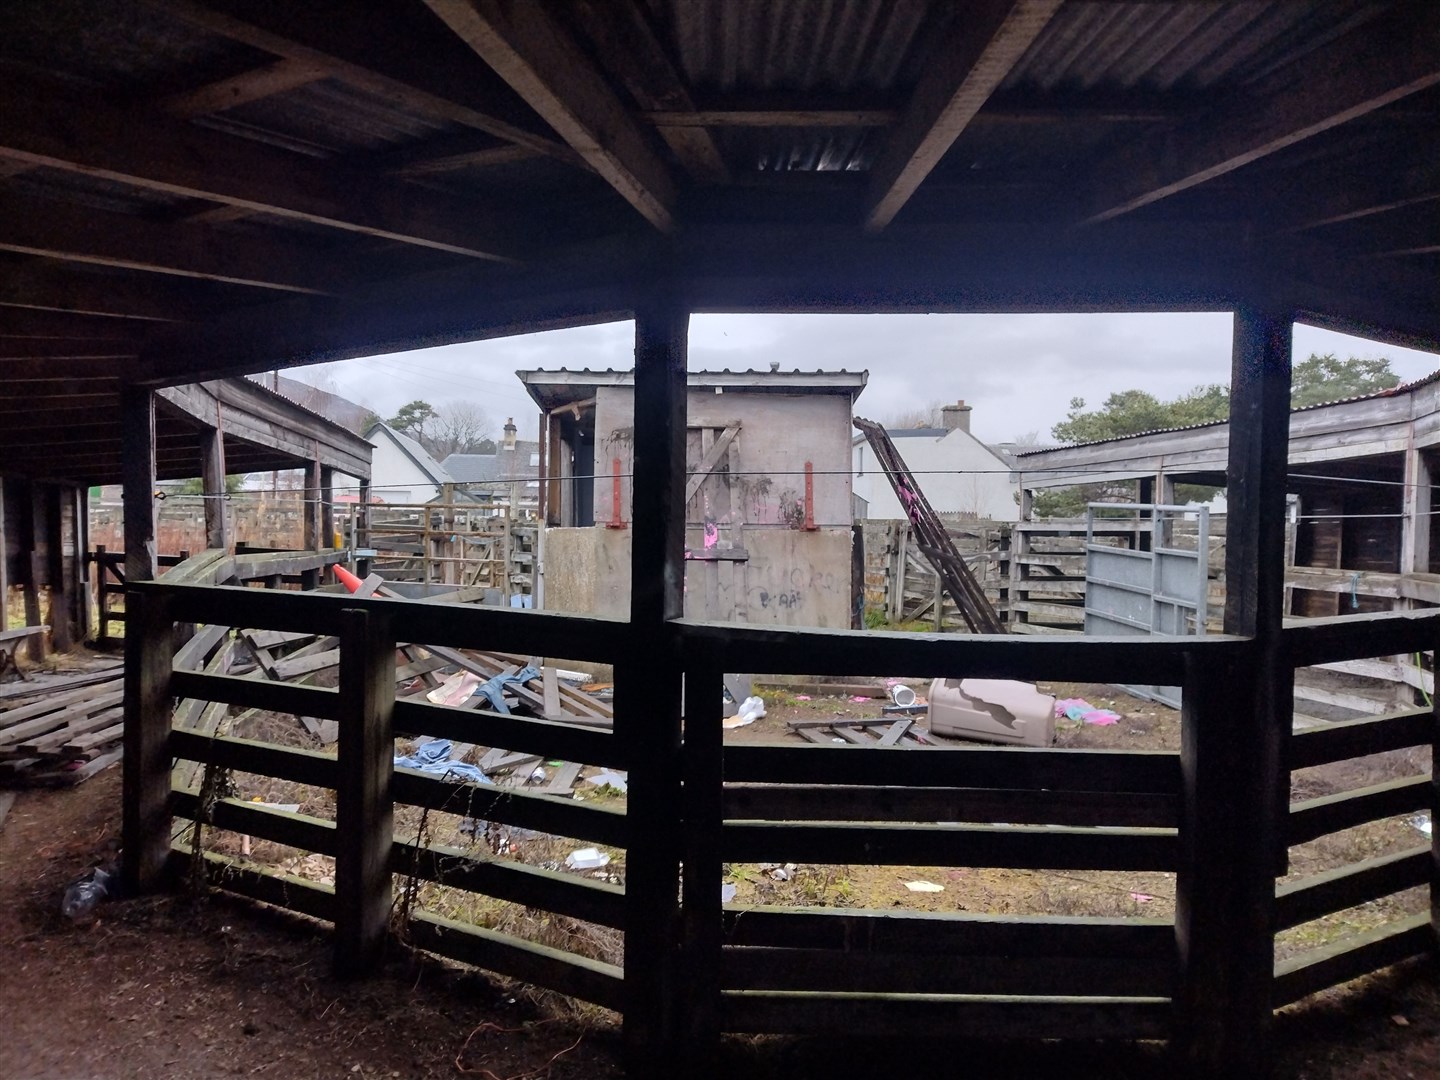 The disused market venue. In its heyday the market had its own platform at the local railway station, lower than standard heights for cattle ramps.